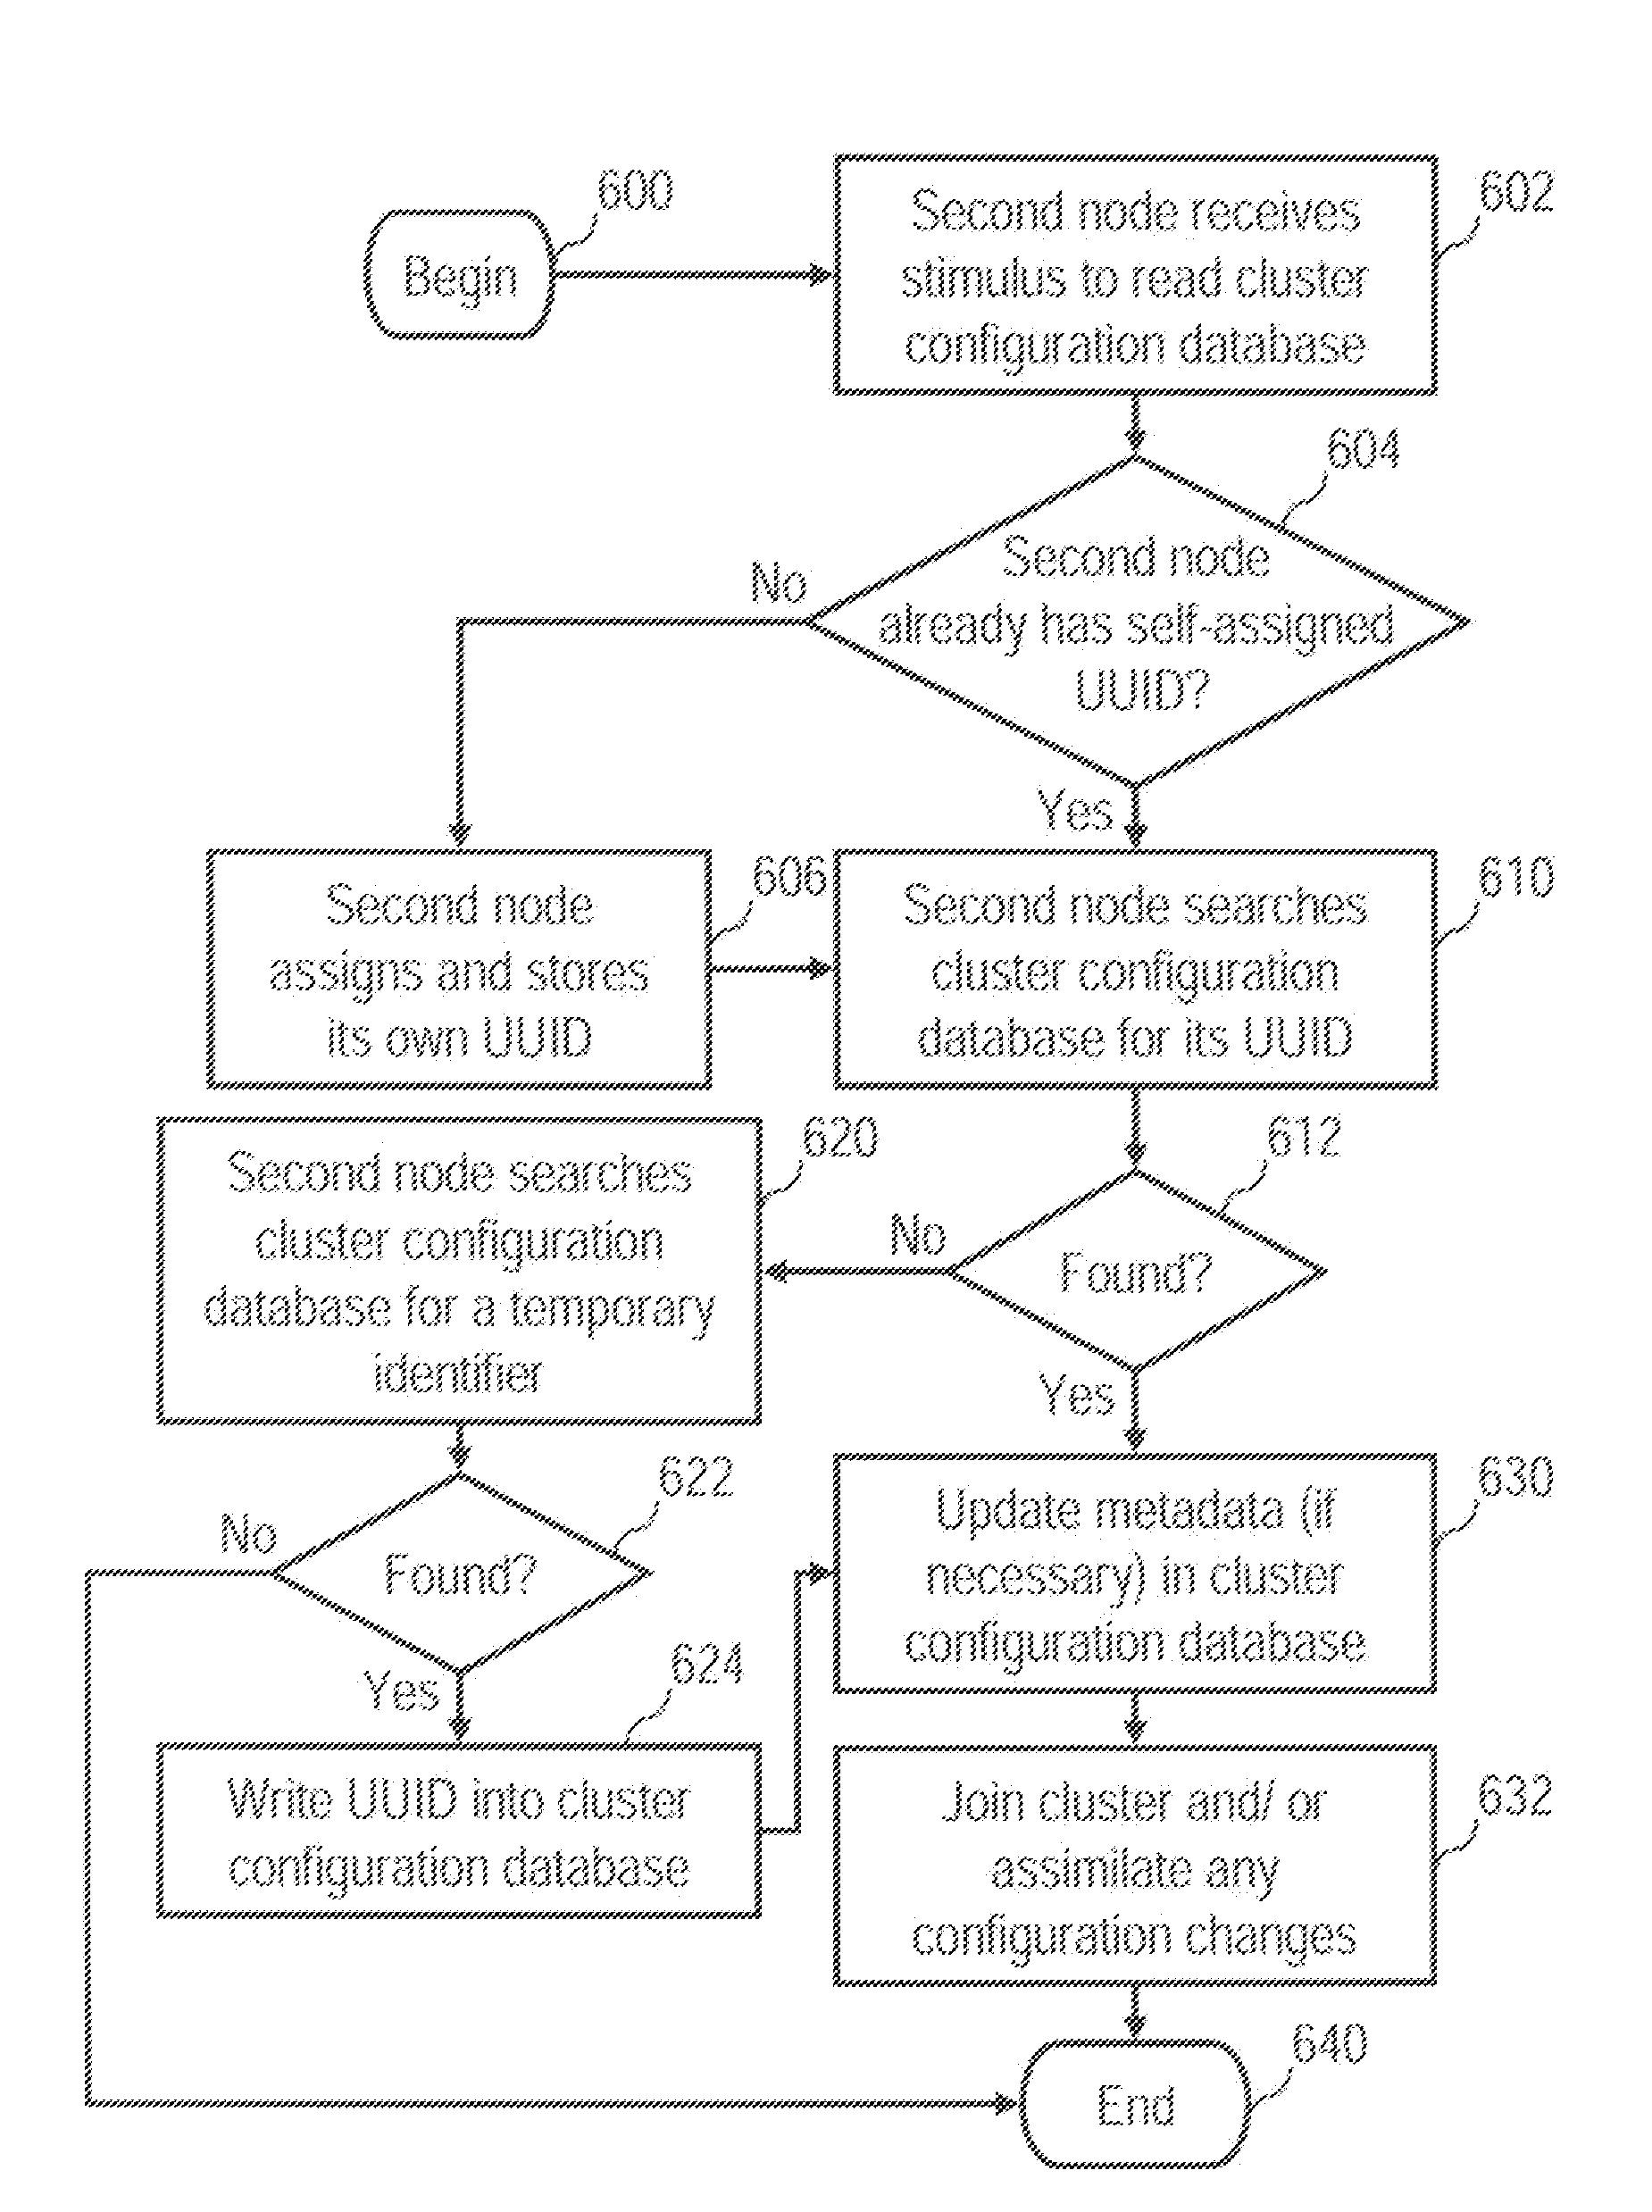 Propagation of unique device names in a cluster system